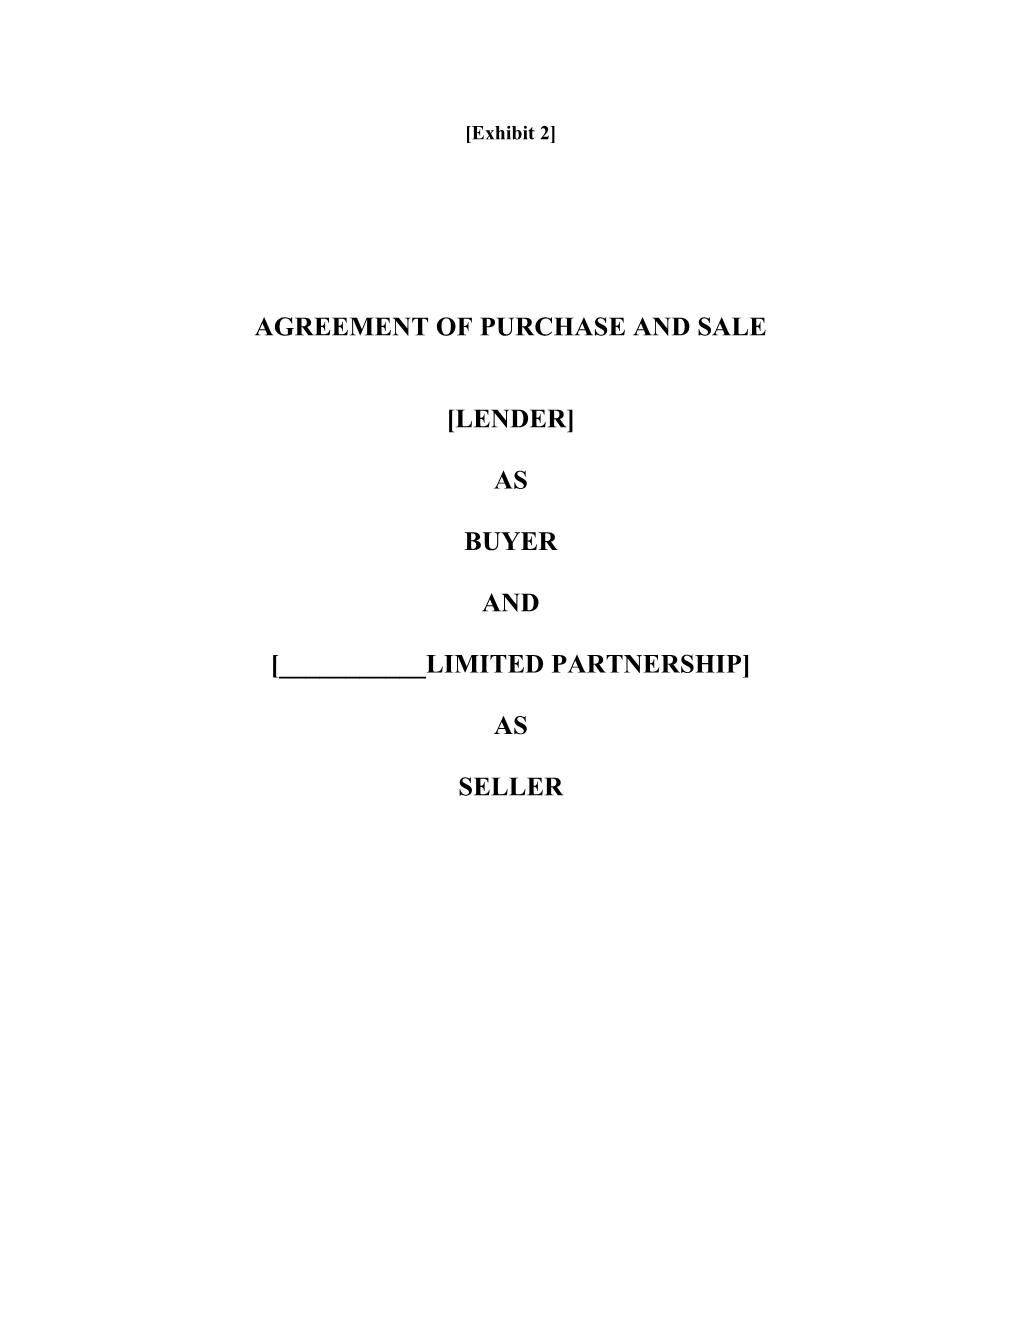 AGREEMENT of PURCHASE and SALE Lender As BUYER and ______Limited Partnership As SELLER